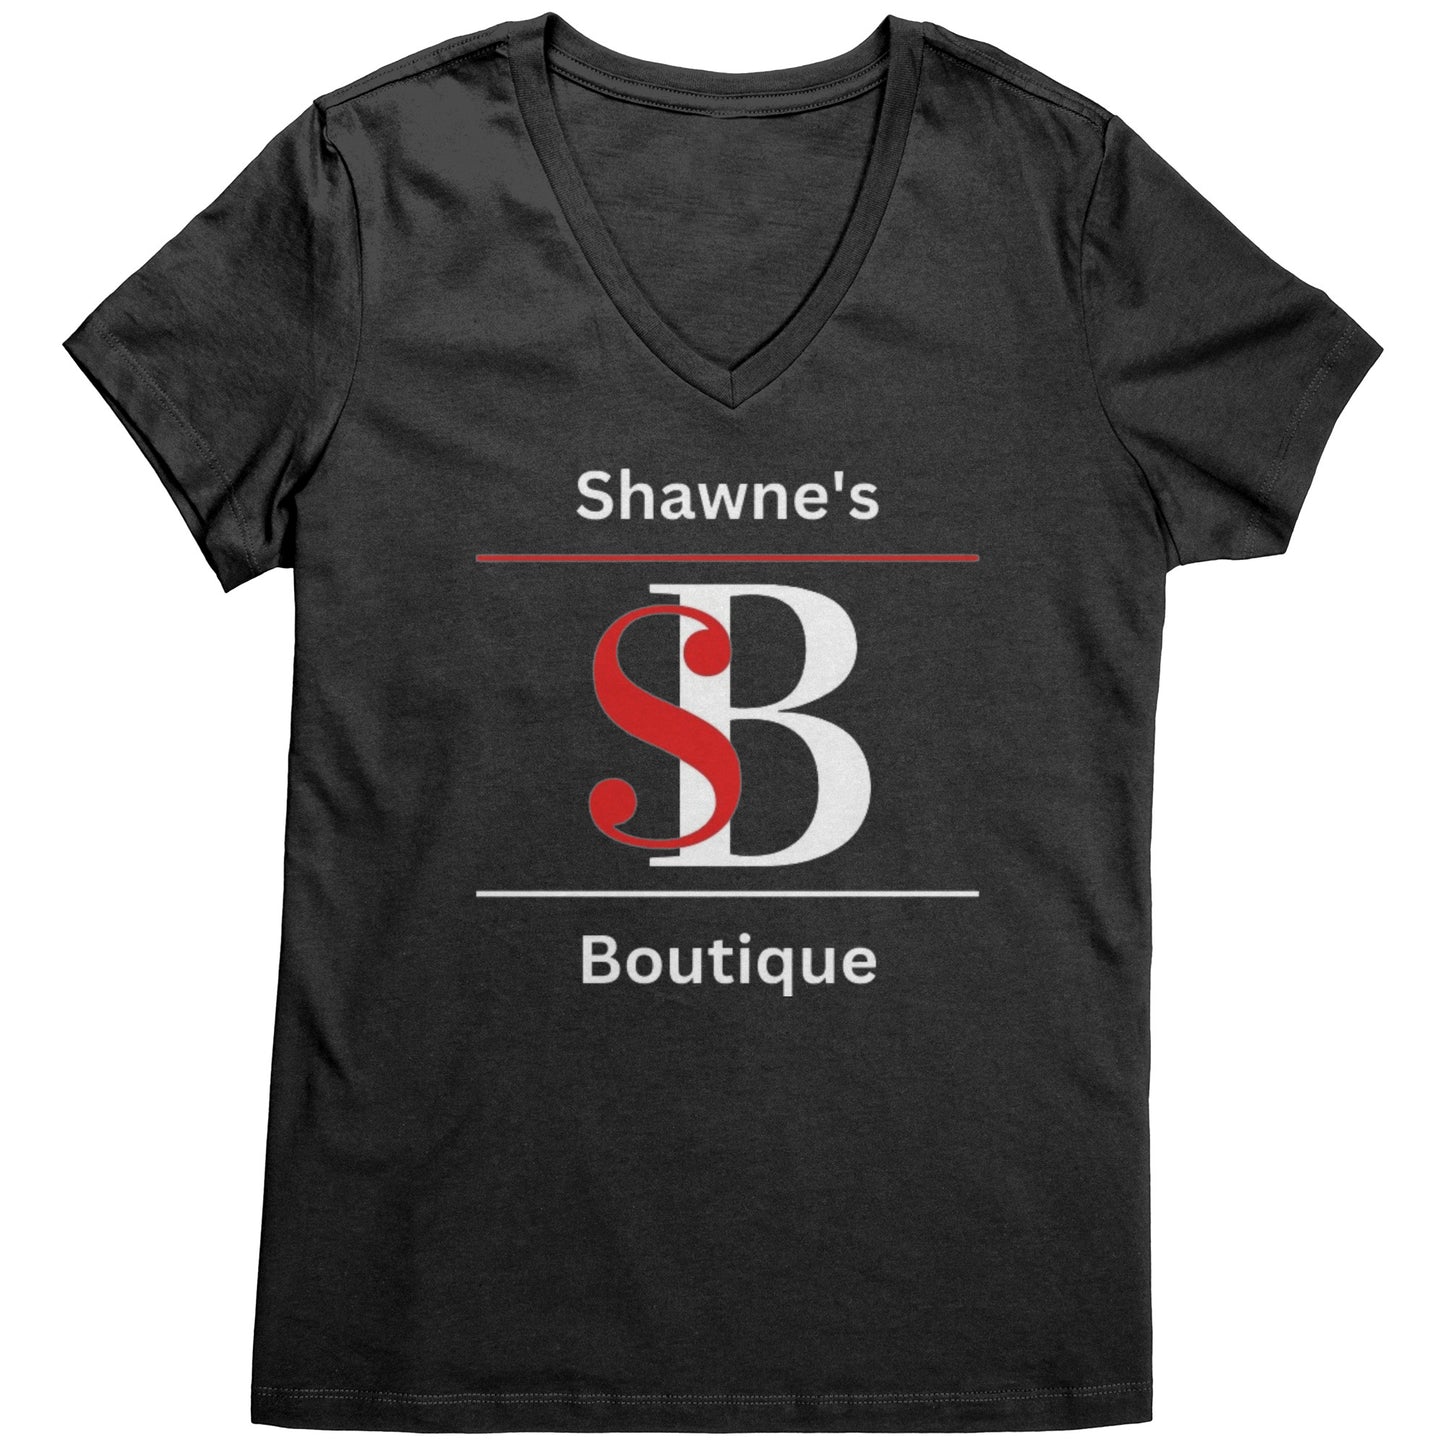 Shawne's Boutique Red/White V-Neck Tee